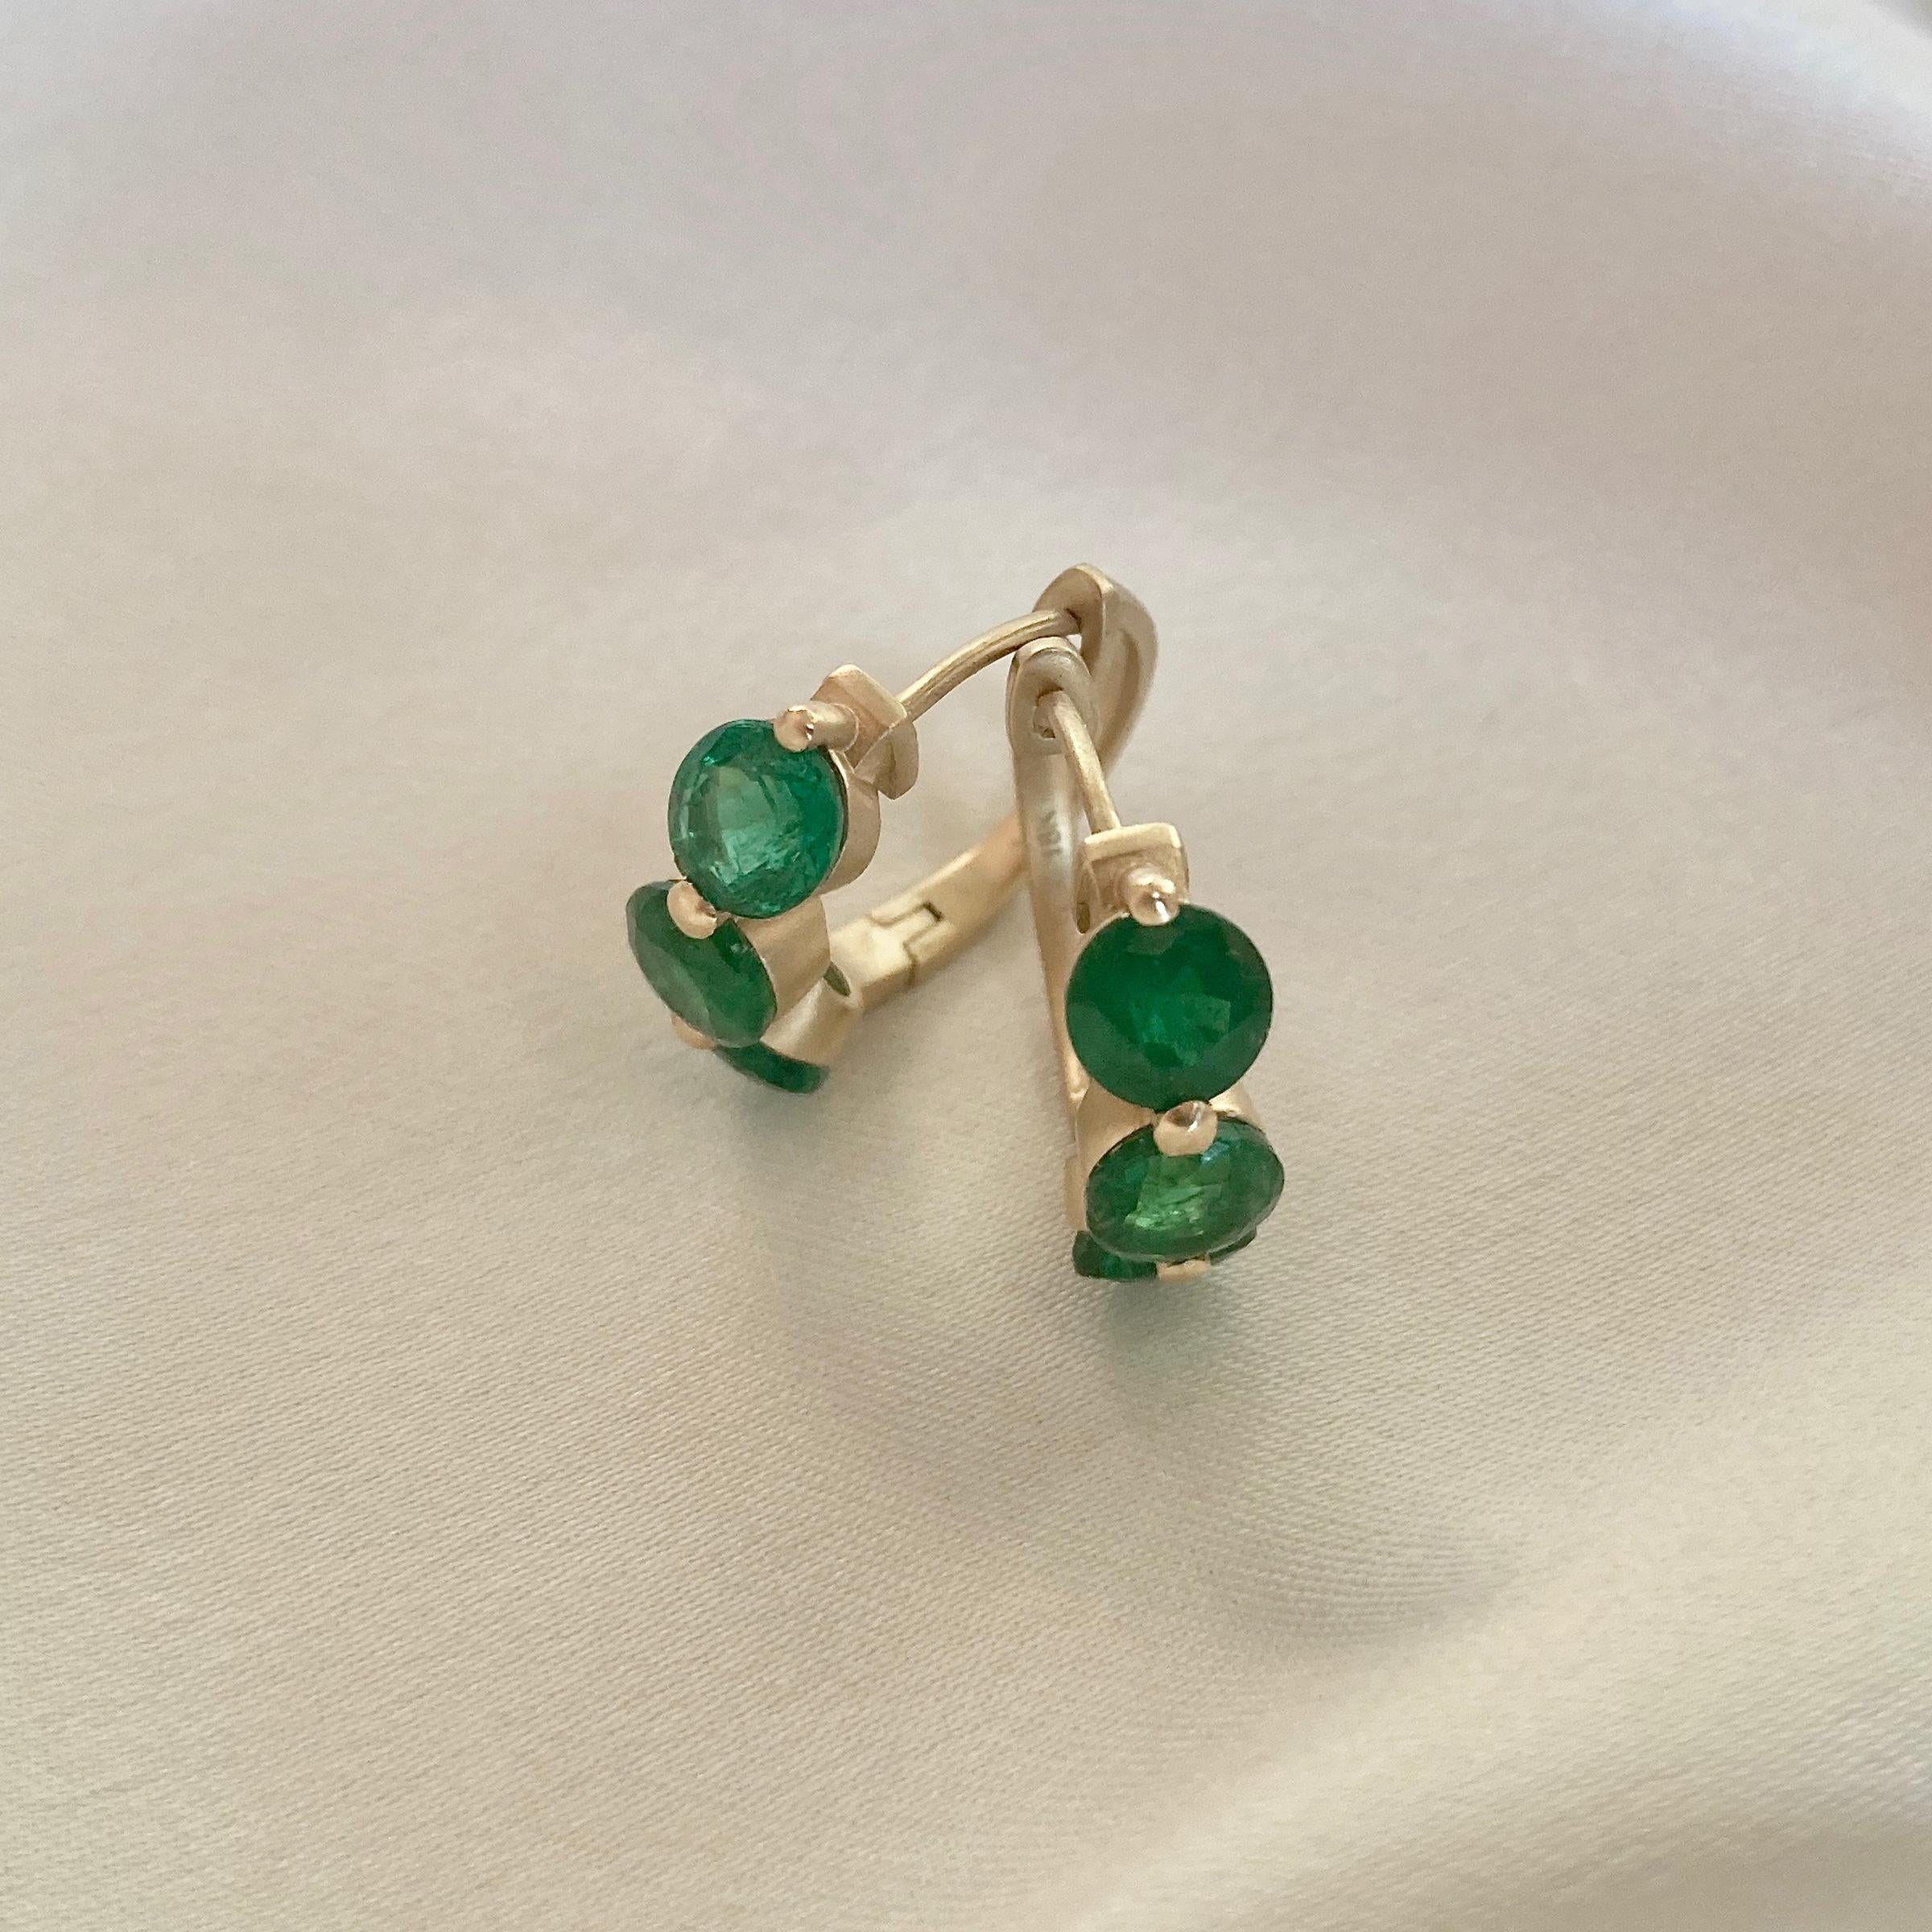 Nancy has done it again.  Wearable luxury at a modest price point and with Emeralds!  These huggy style earrings are light weight, fit close to the ear and showcase 2.92 carats of beautiful, very fine quality Emeralds.  Since there are no diamonds,